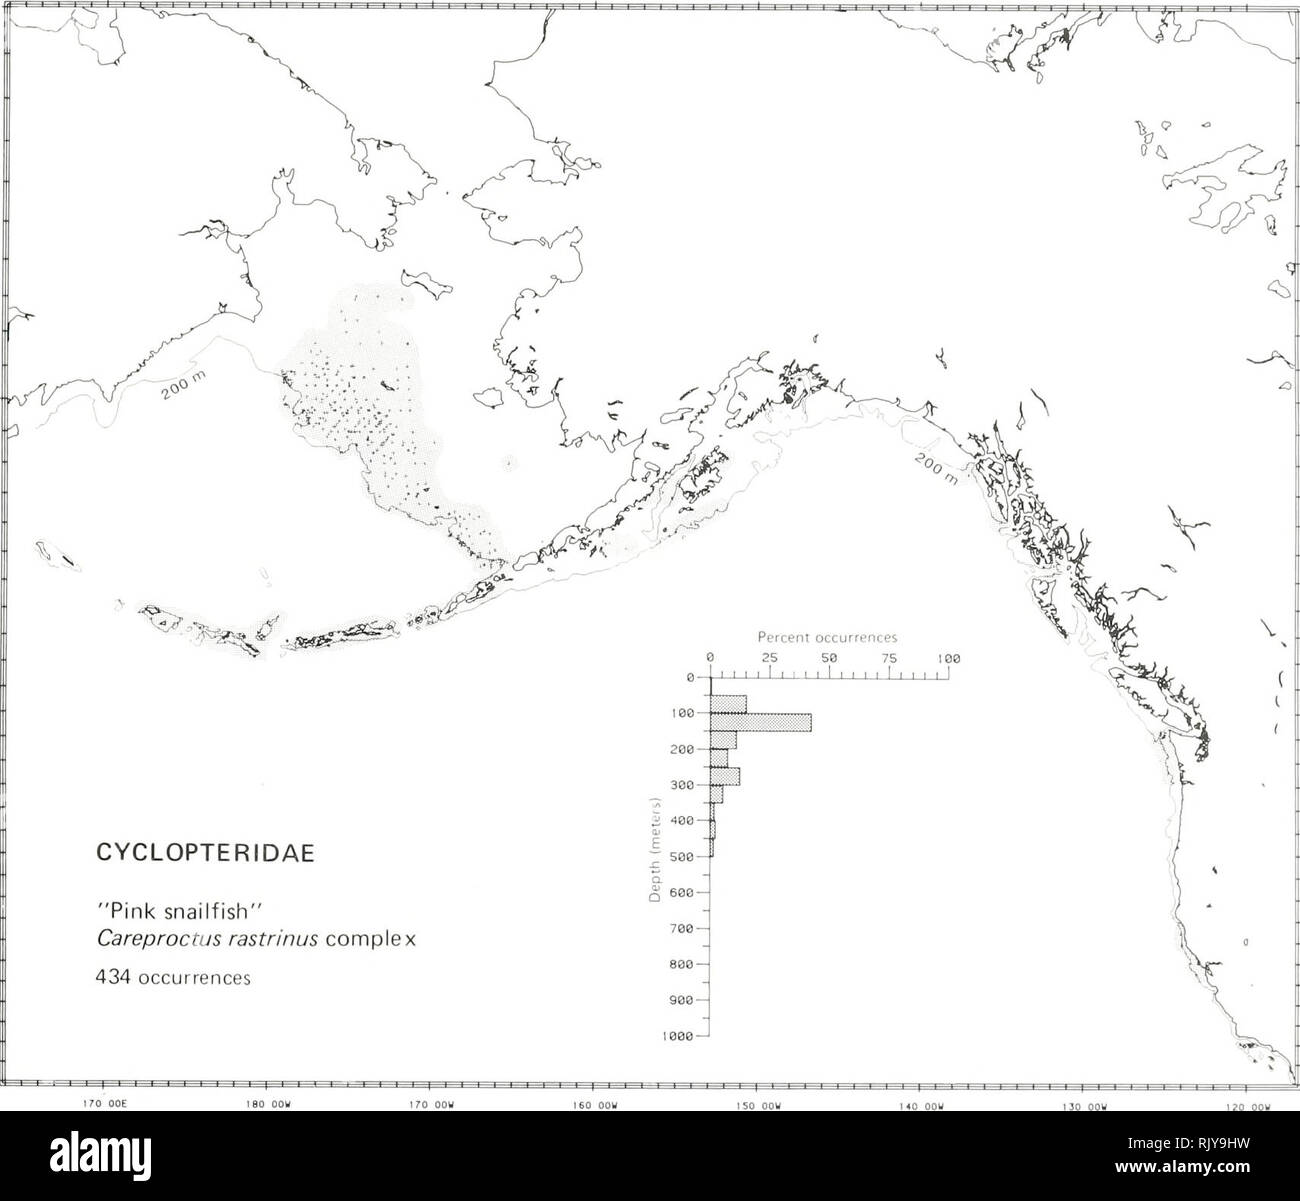 . Atlas and zoogeography of common fishes in the Bering Sea and Northeastern Pacific / M. James Allen, Gary B. Smith. Fishes Bering Sea Geographical distribution.. &quot;PINK SNAILFISH,&quot; Careproctus rastrinus Complex Cyclopteridae: Lumpfishes and Snailfishes Taxonomic comment This complex may include four or more species that have been called &quot;pink snailfish&quot; in the field, including the following: pink snailfish, Careproctus osbomi (Townsend and Nichols 1925); monster snailfish, C. phastna Gilbert 1896; salmon snailfish, C. rastrinus Gilbert and Burke 1912; and peachskin snailfi Stock Photo